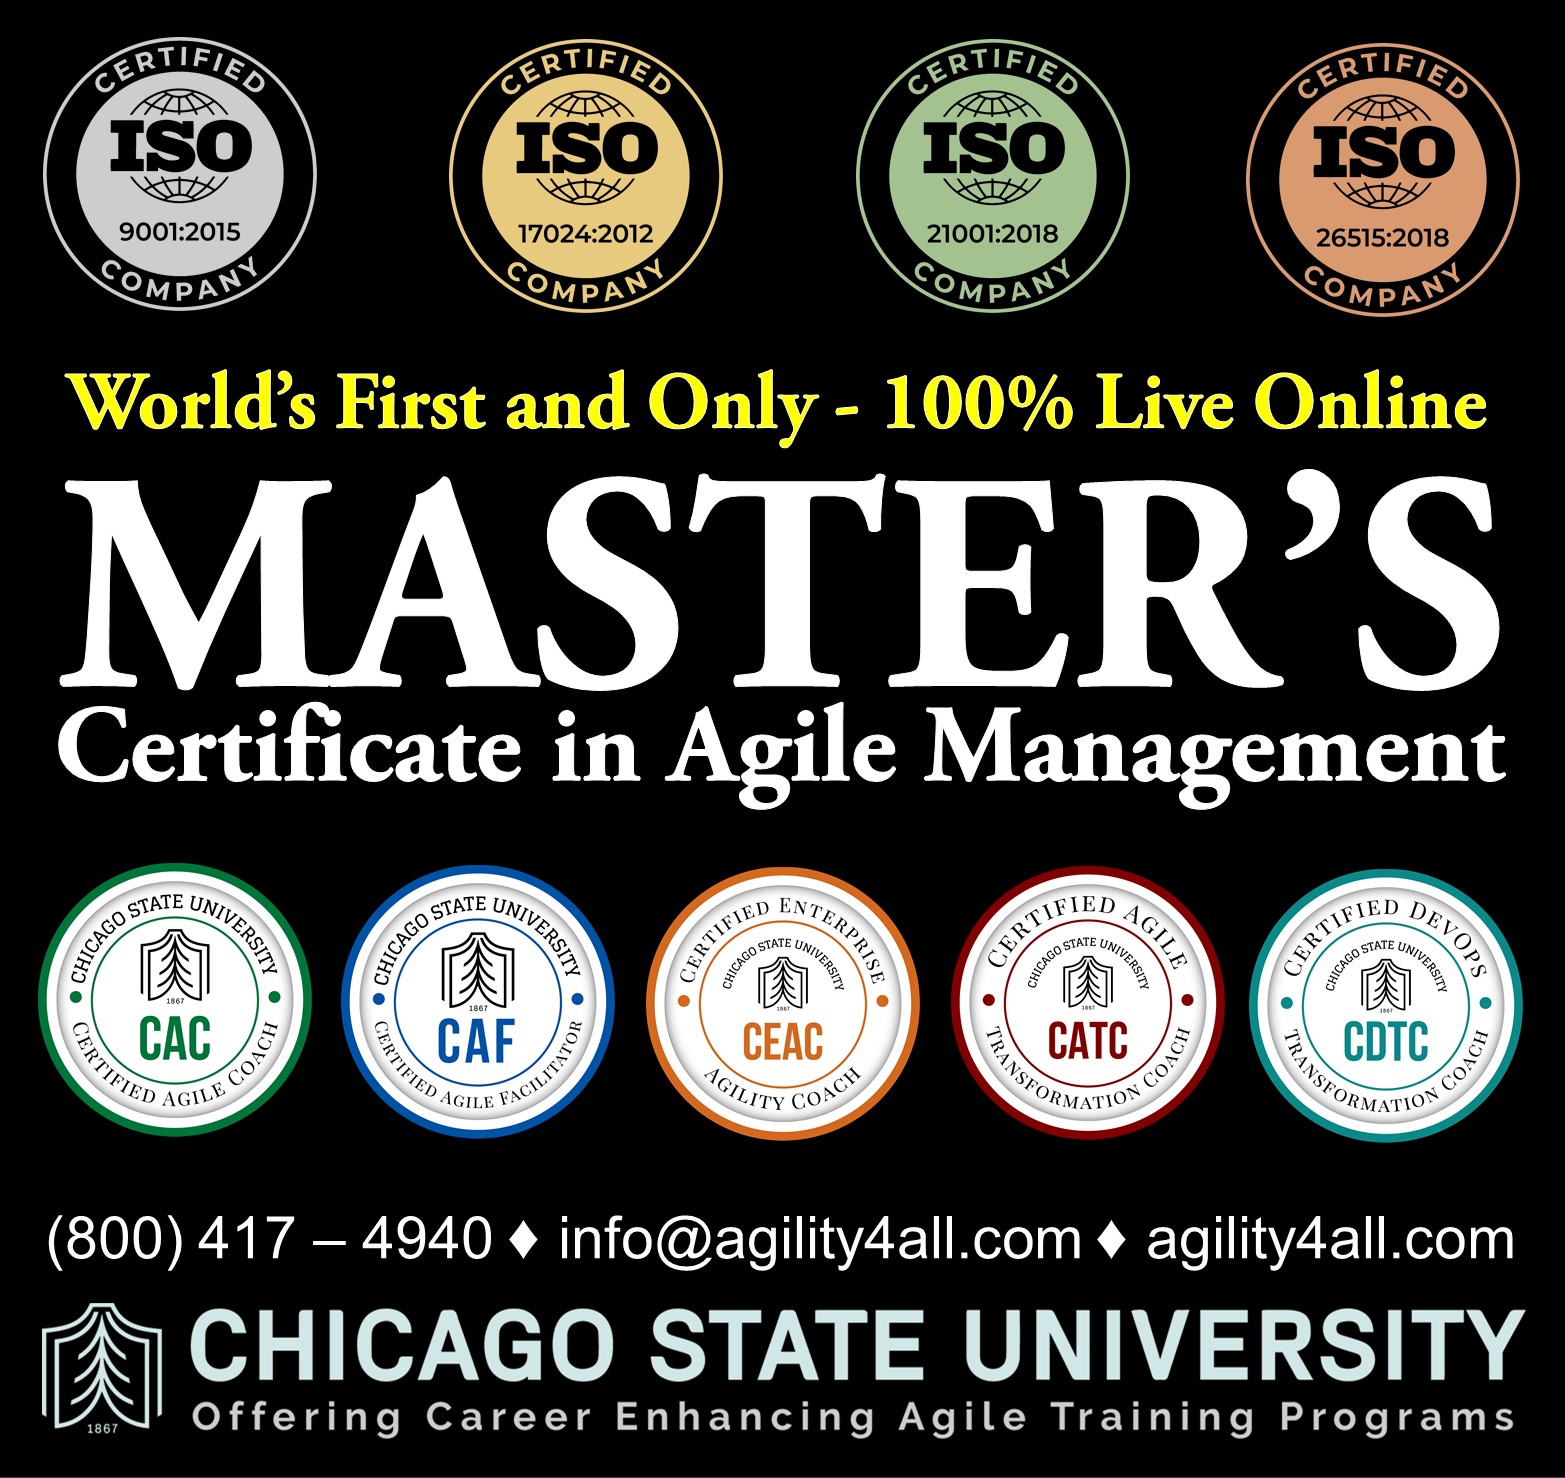 Master's Certificate in Agile Management